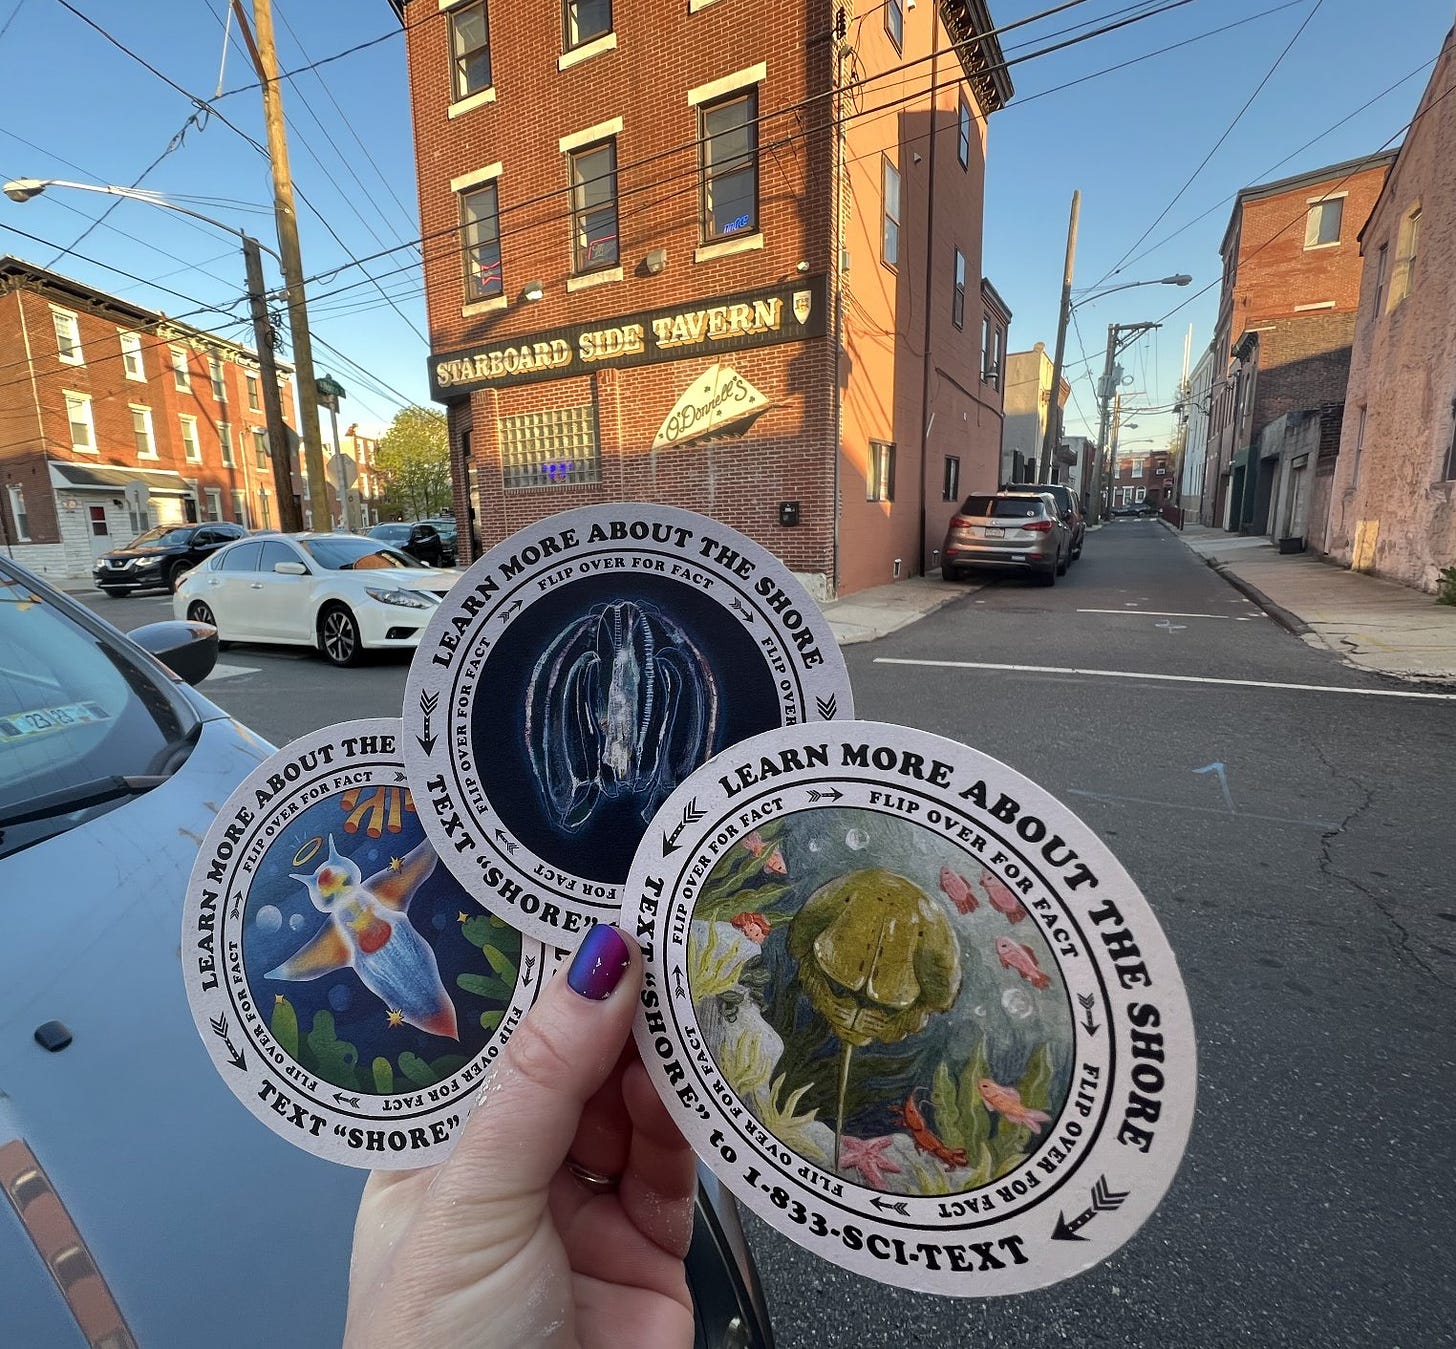 3 coasters that say "Learn more about the shore text SHORE to 1-833-SCI-text" and 3 animals illustrated on there, including horseshoe crabs, a sea angel, and a ctenophore